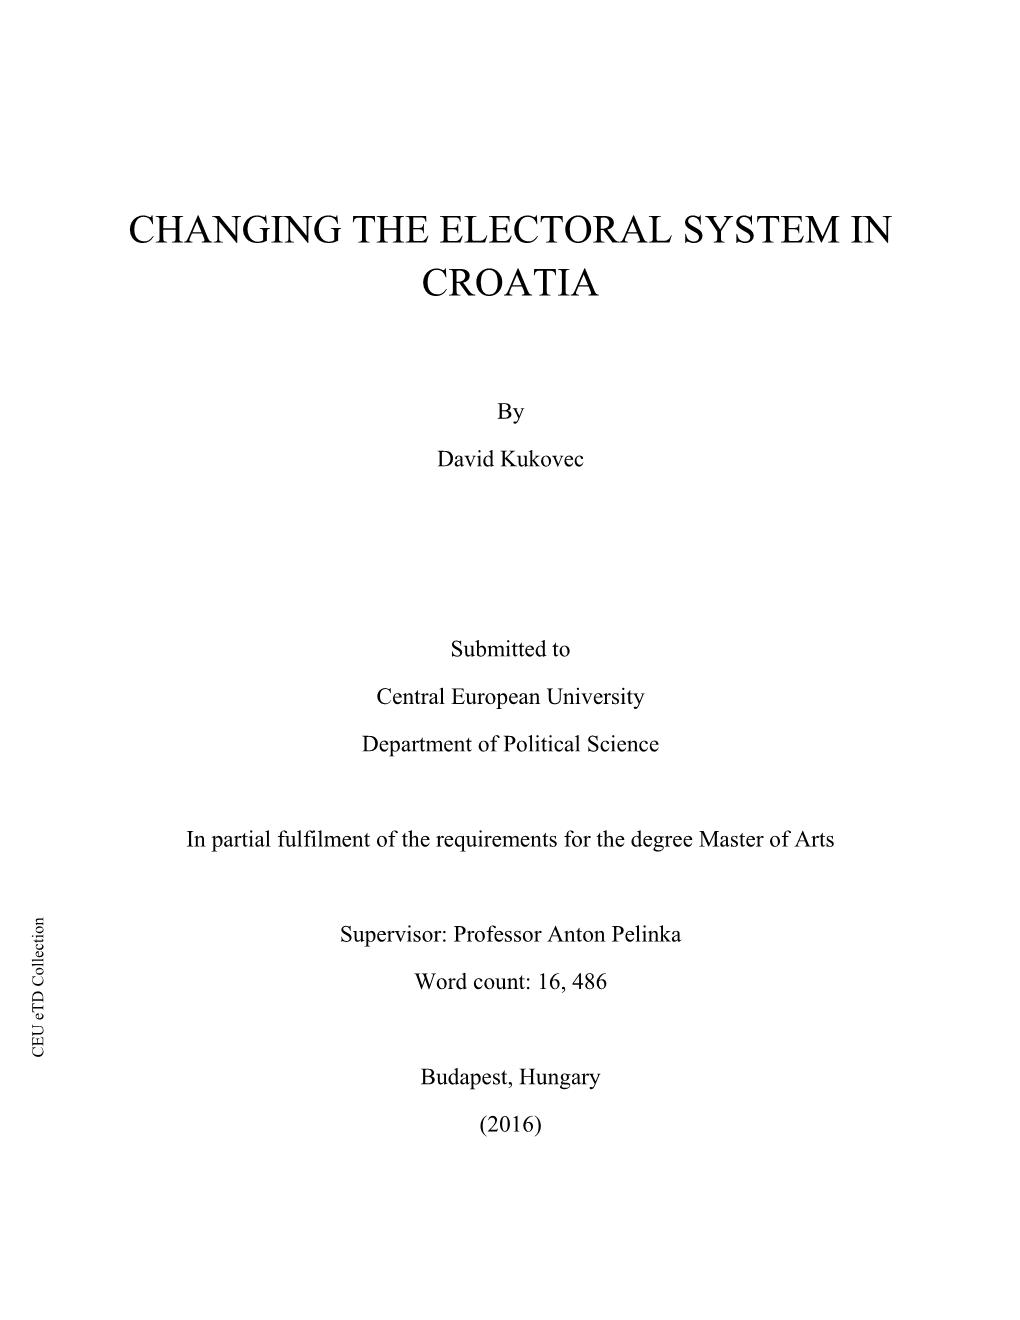 Changing the Electoral System in Croatia